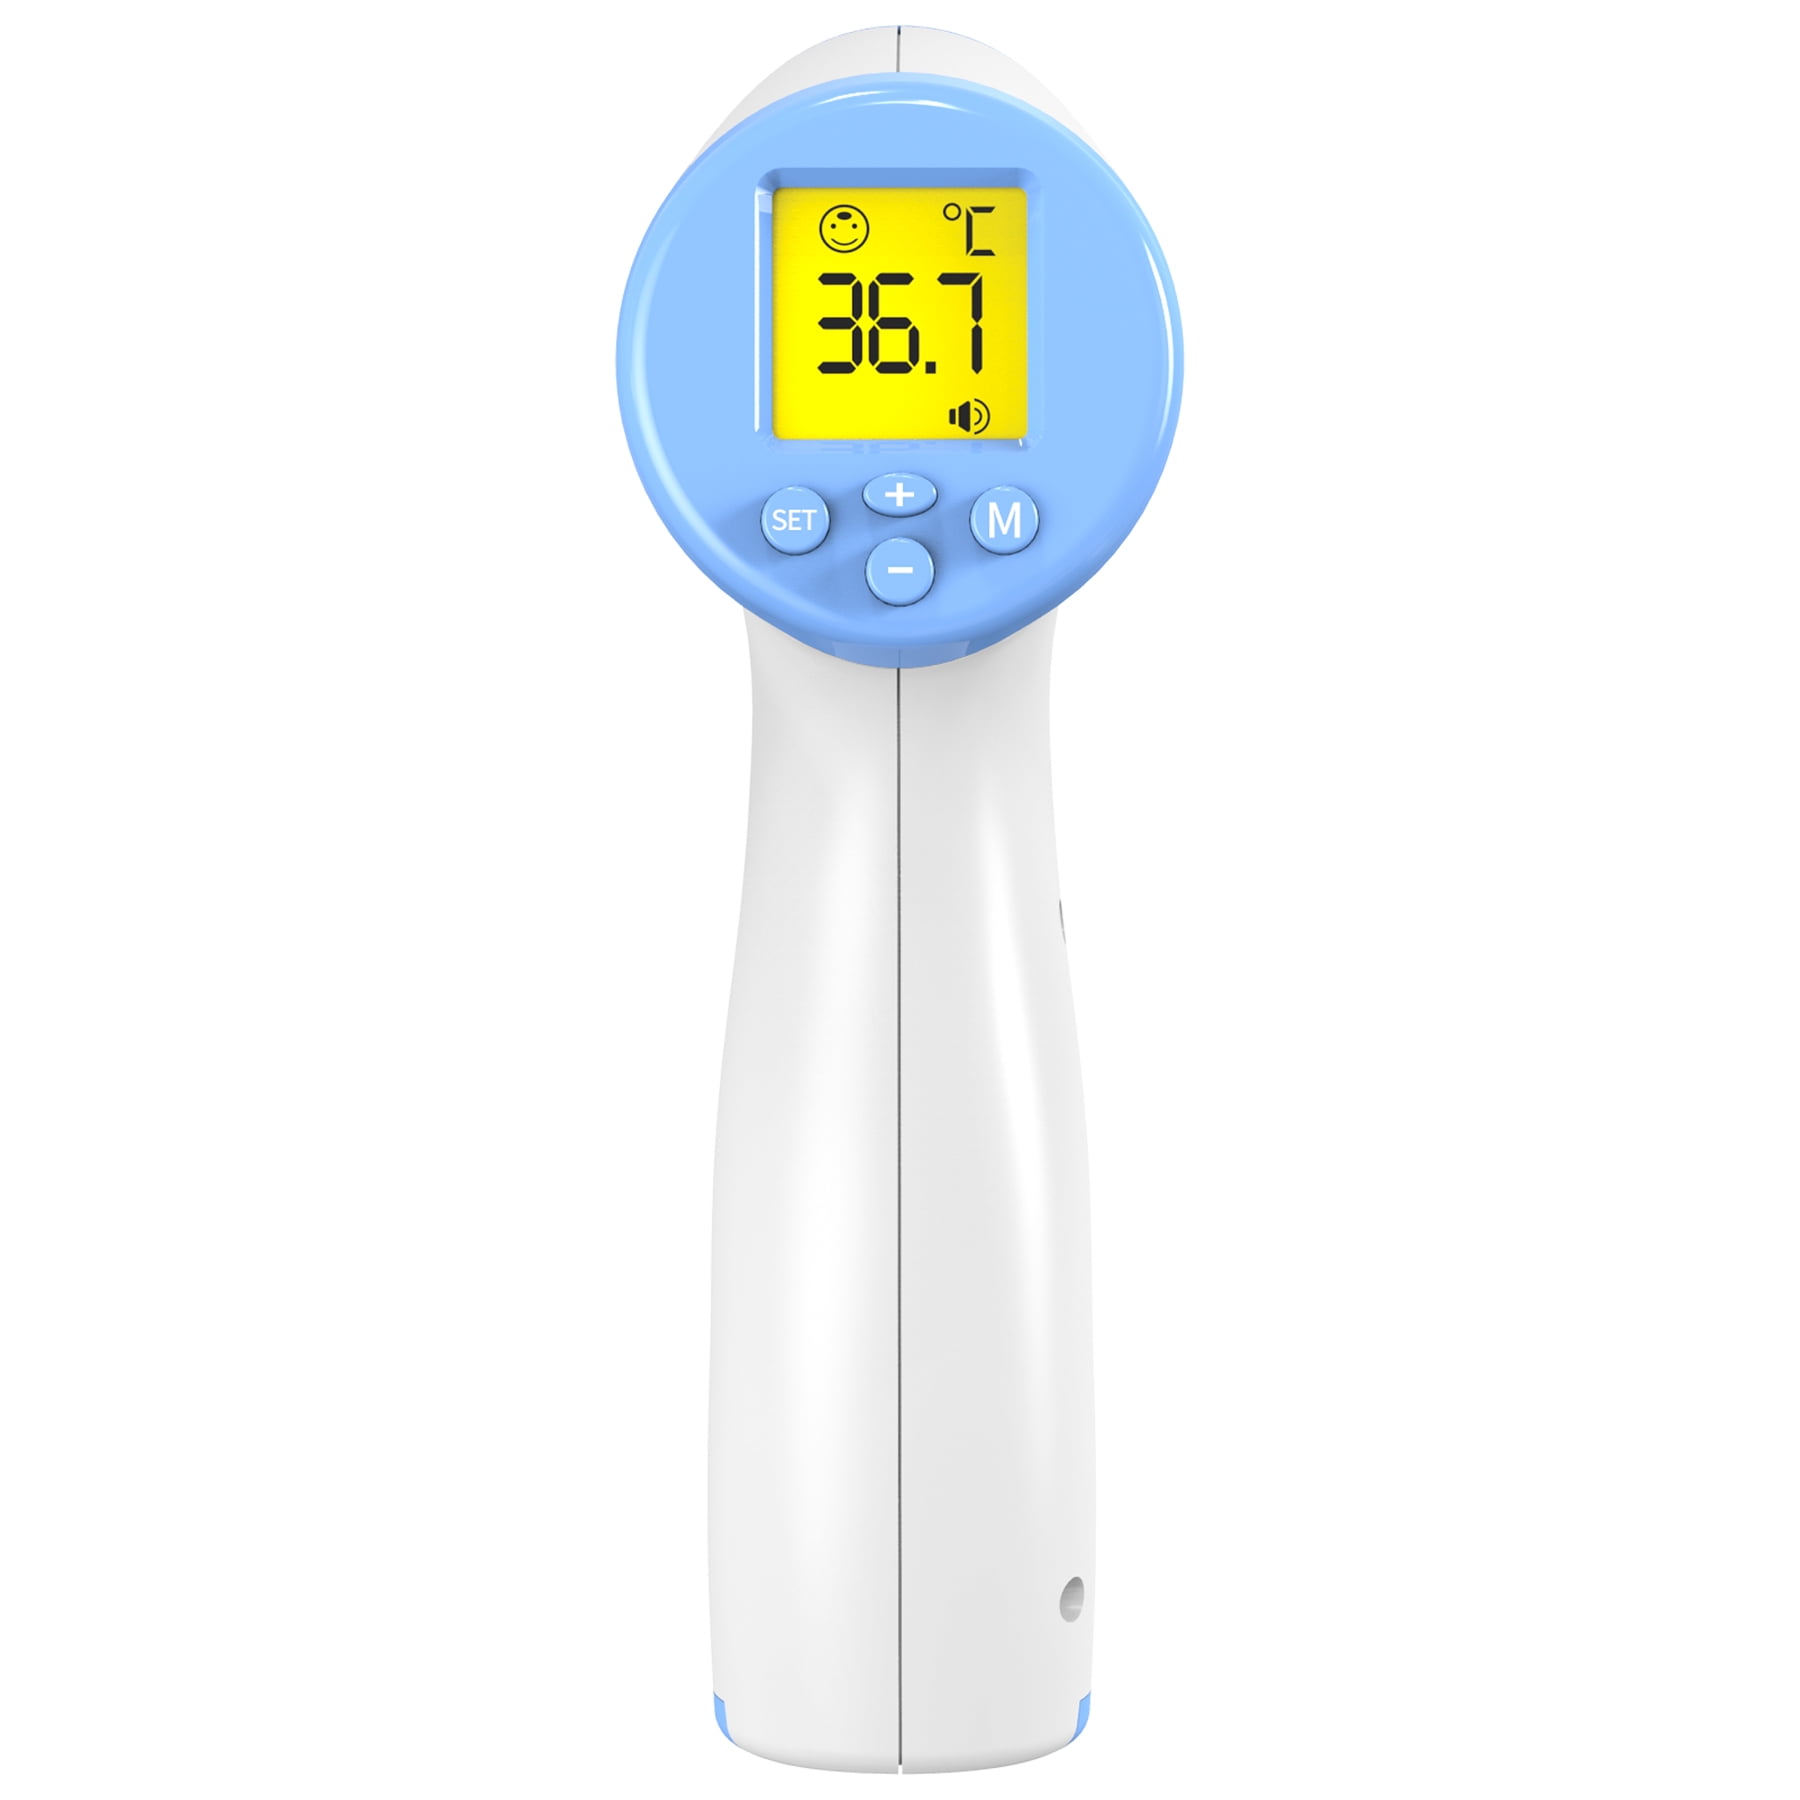 Basic Digital Body Thermometer in Fahrenheit : ID 4601 : $8.95 : Adafruit  Industries, Unique & fun DIY electronics and kits